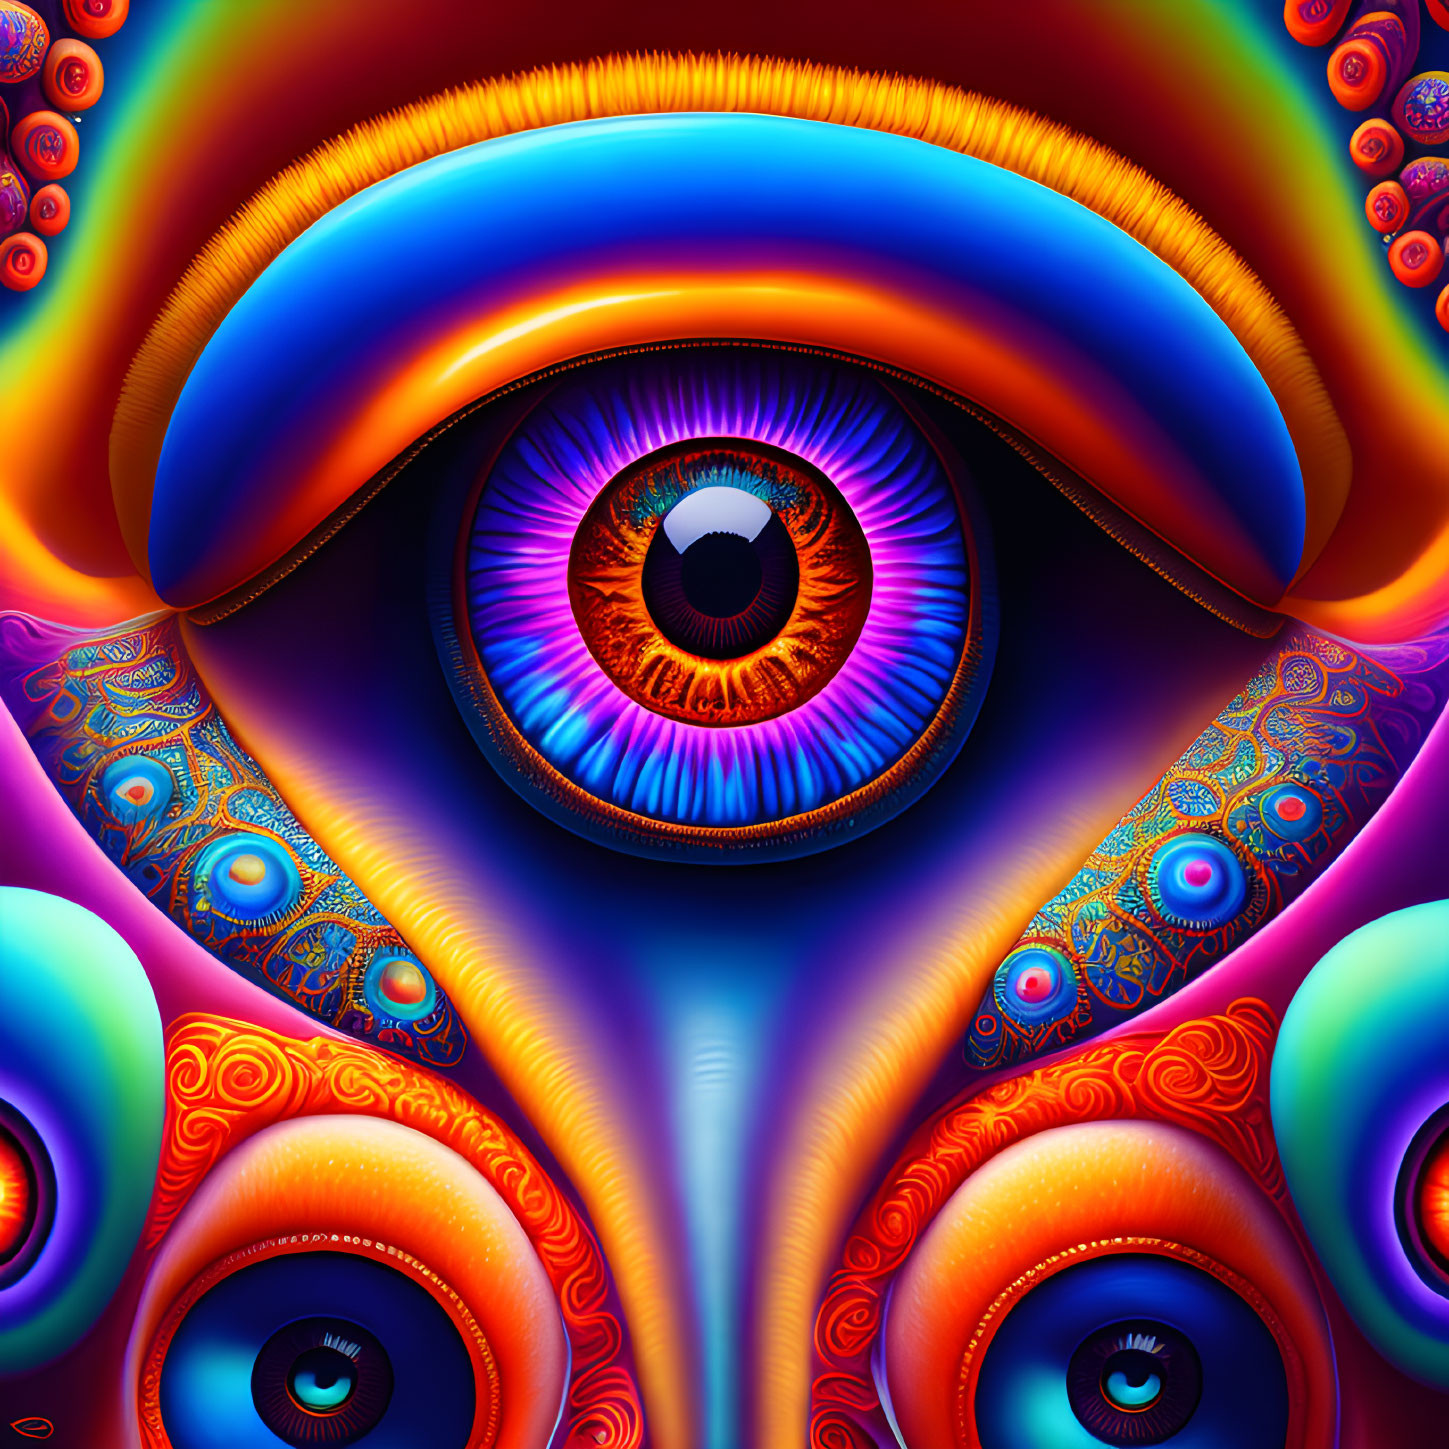 Colorful Digital Artwork with Central Eye and Psychedelic Patterns